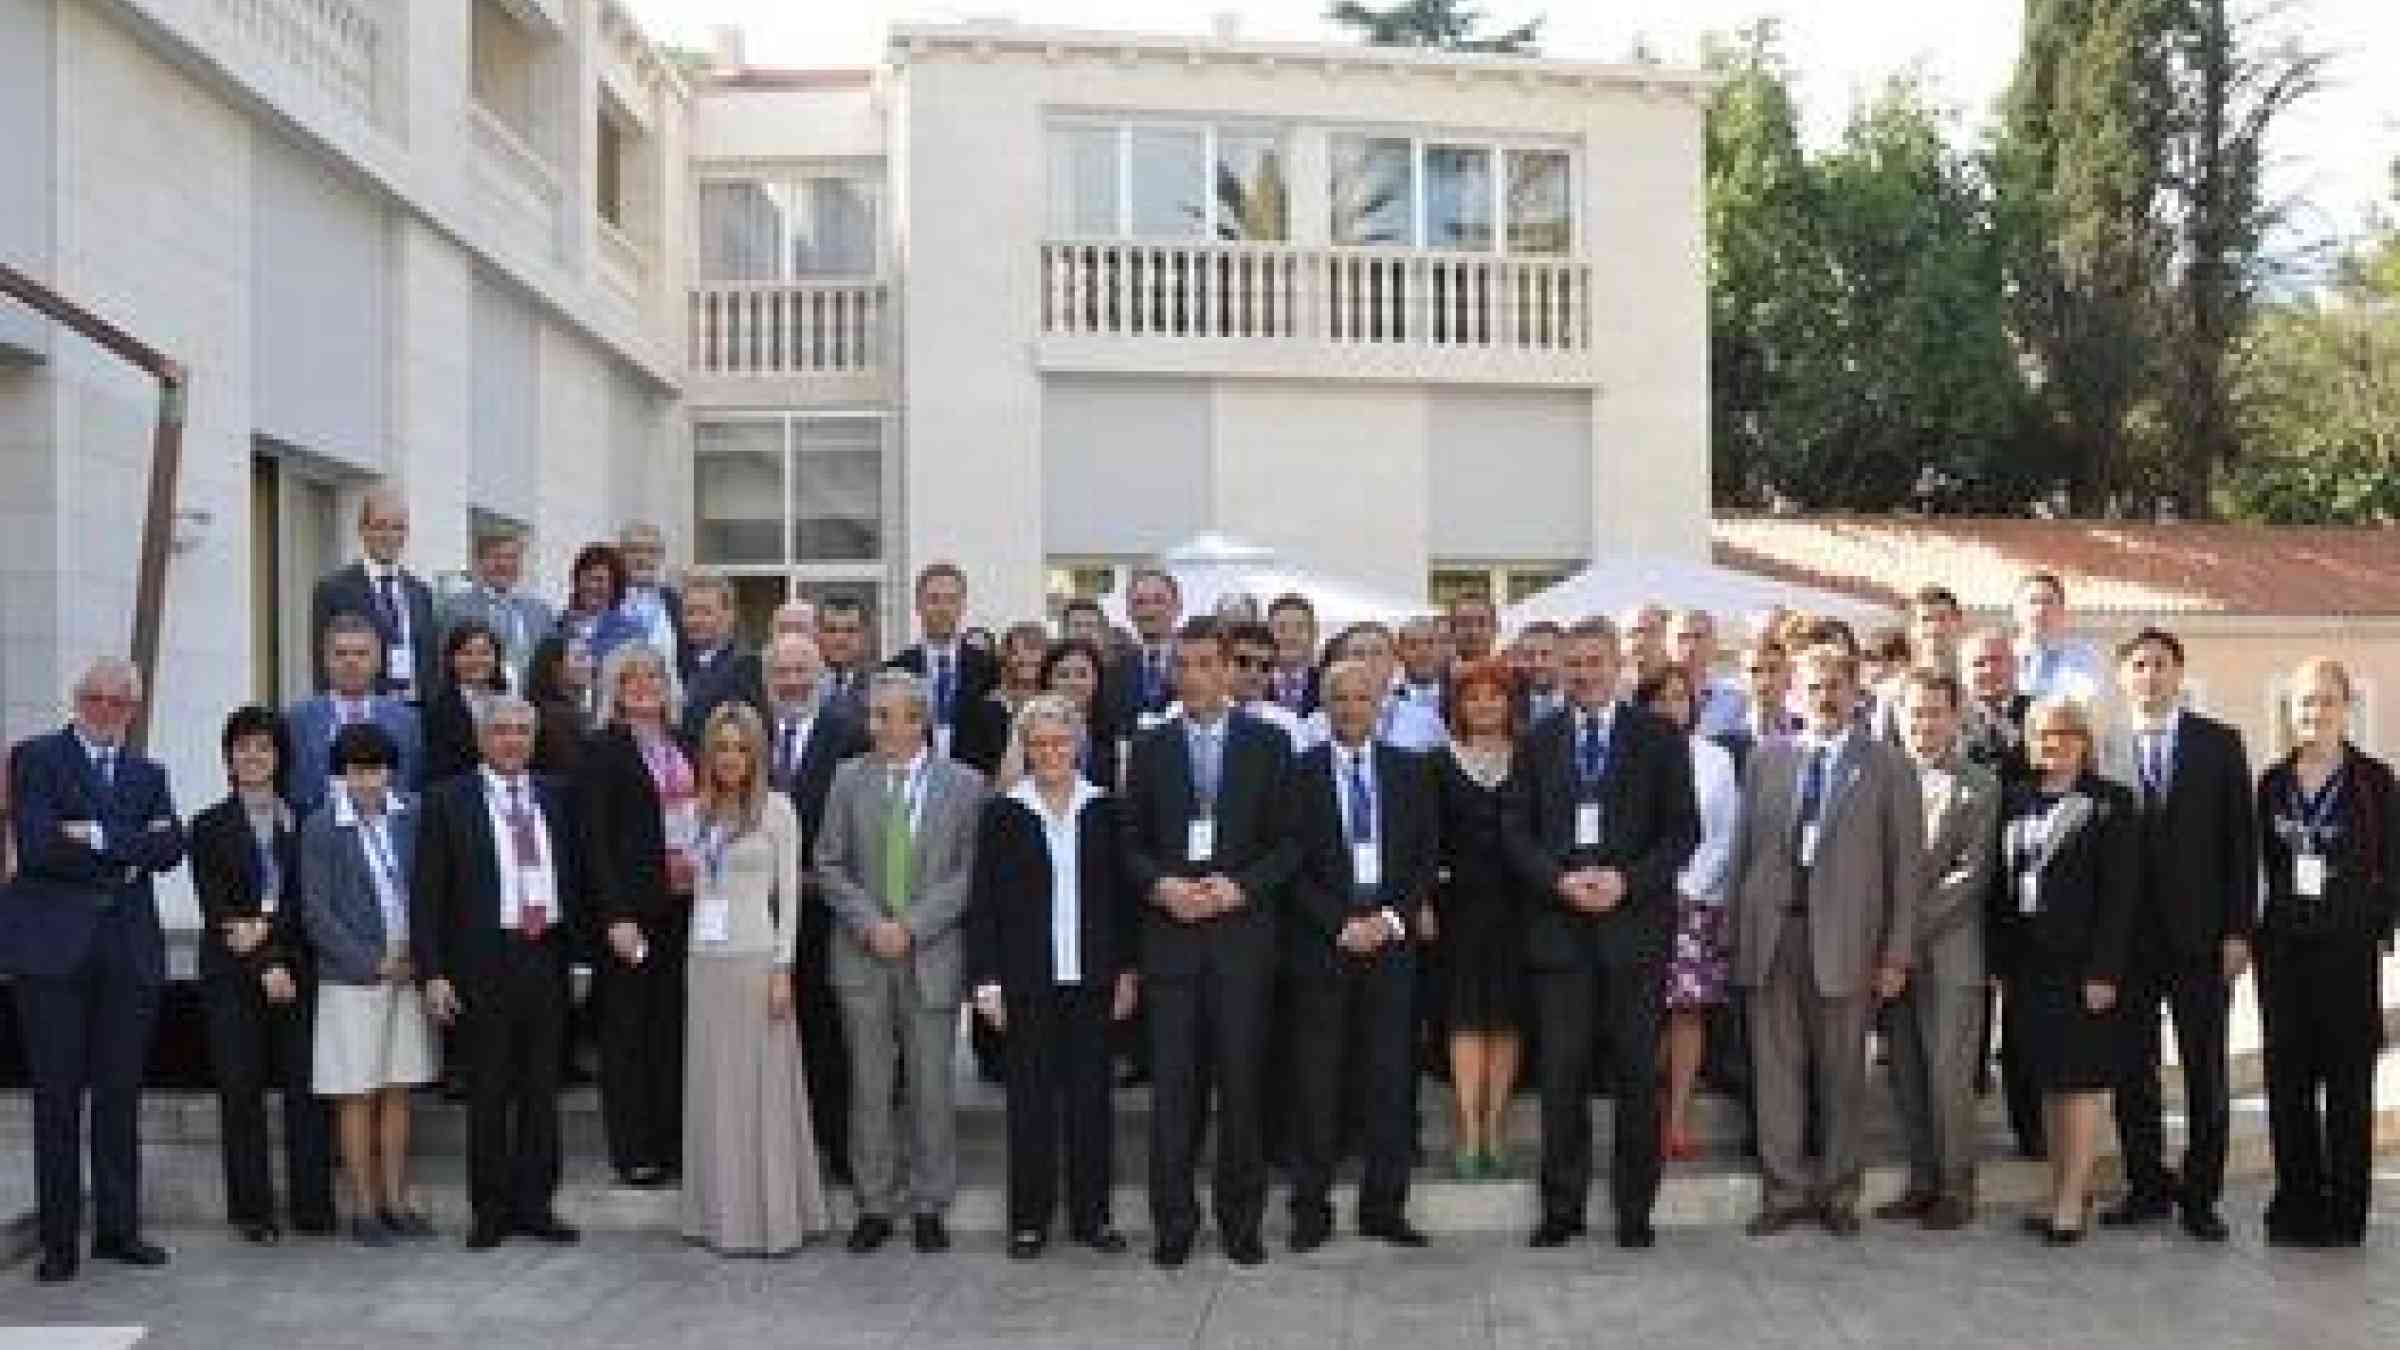 Participants of the 2012 European Forum for Disaster Risk Reduction.